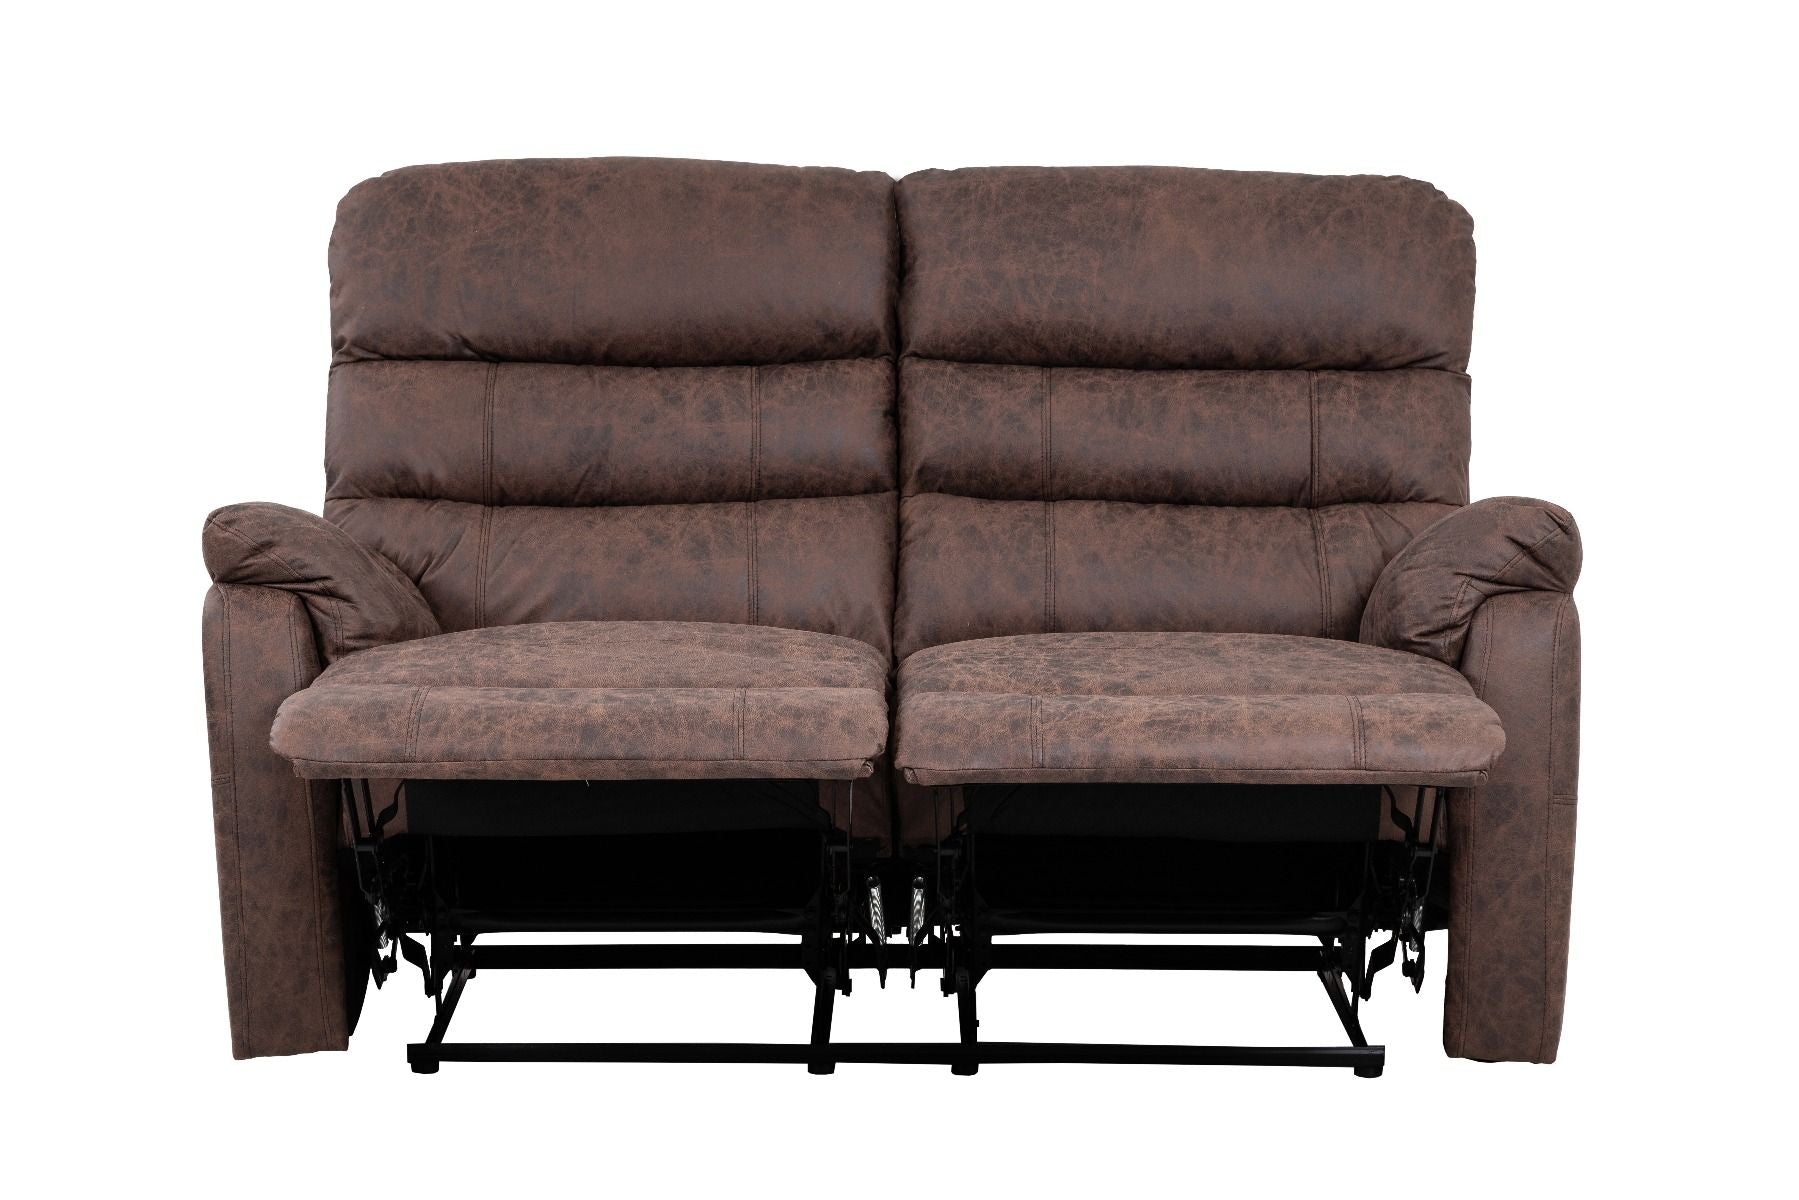 Taylor 2 Seater Recliner-Leather Air-Antique Brown Rub Off